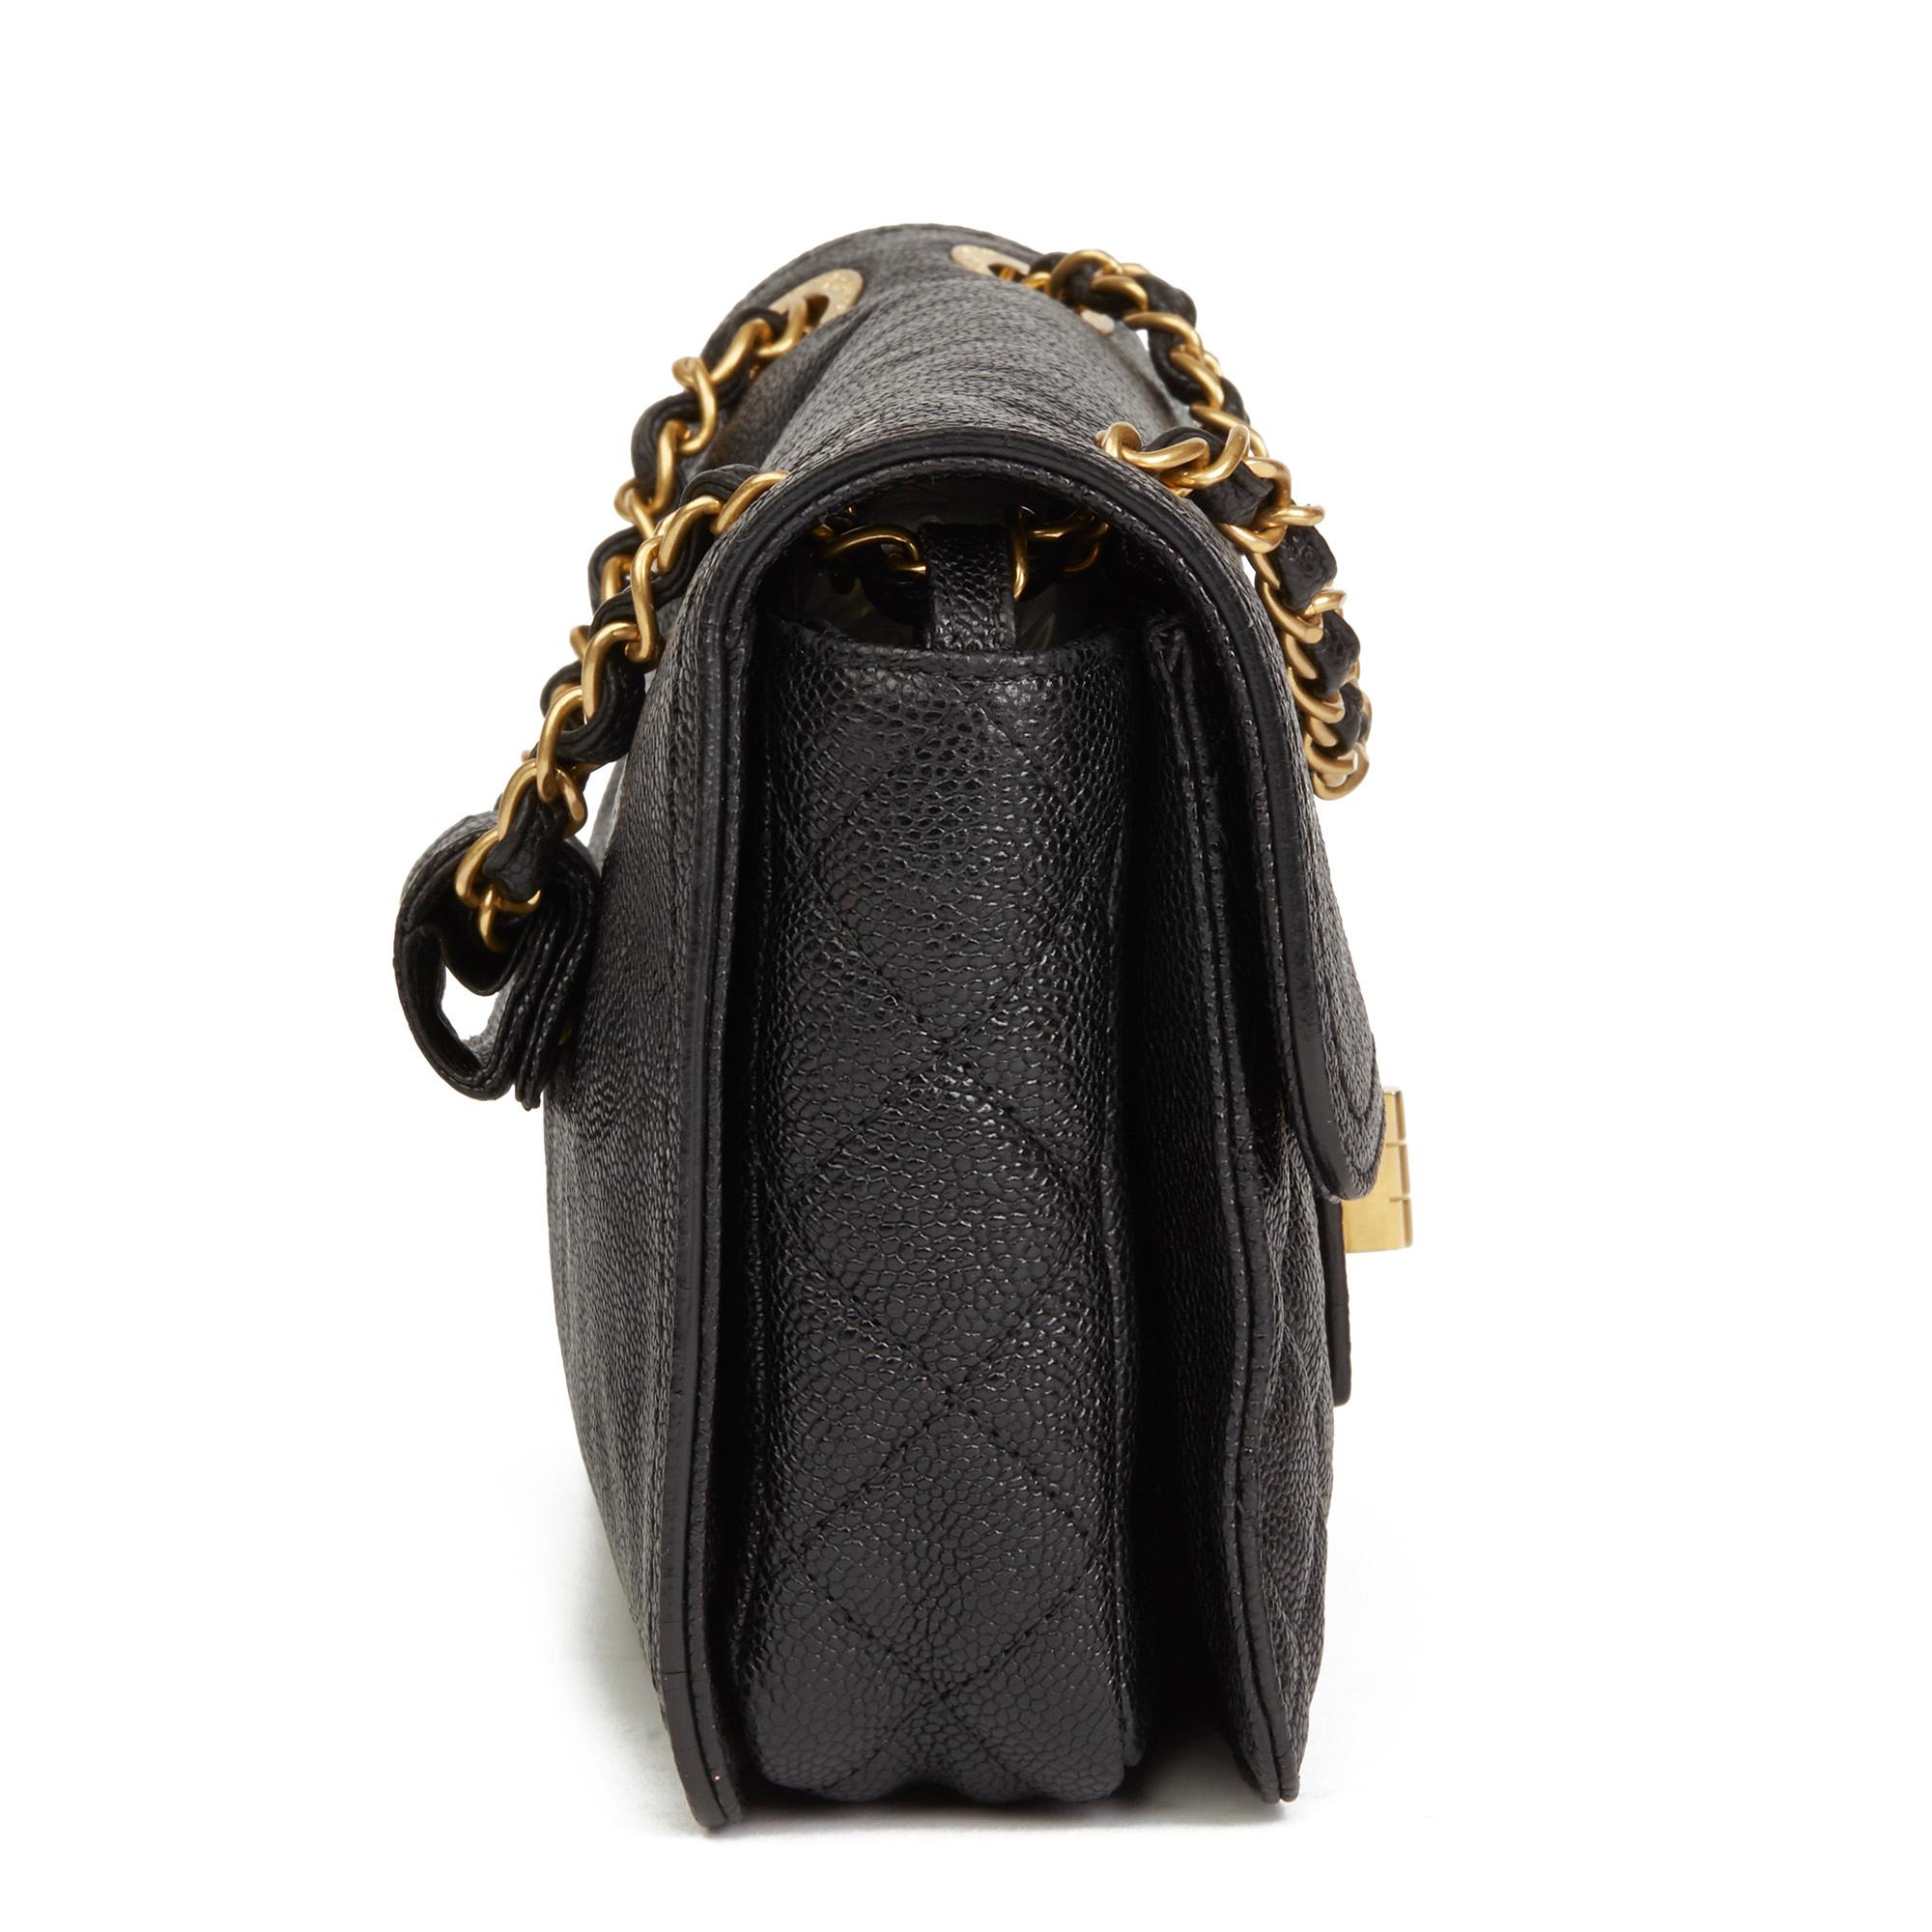 CHANEL
Black Quilted Caviar Leather 2.55 Reissue Classic Single Flap Bag

Xupes Reference: HB2966
Serial Number: 16022667
Age (Circa): 2012
Accompanied By: Authenticity Card
Authenticity Details: Serial Sticker, Authenticity Card (Made in